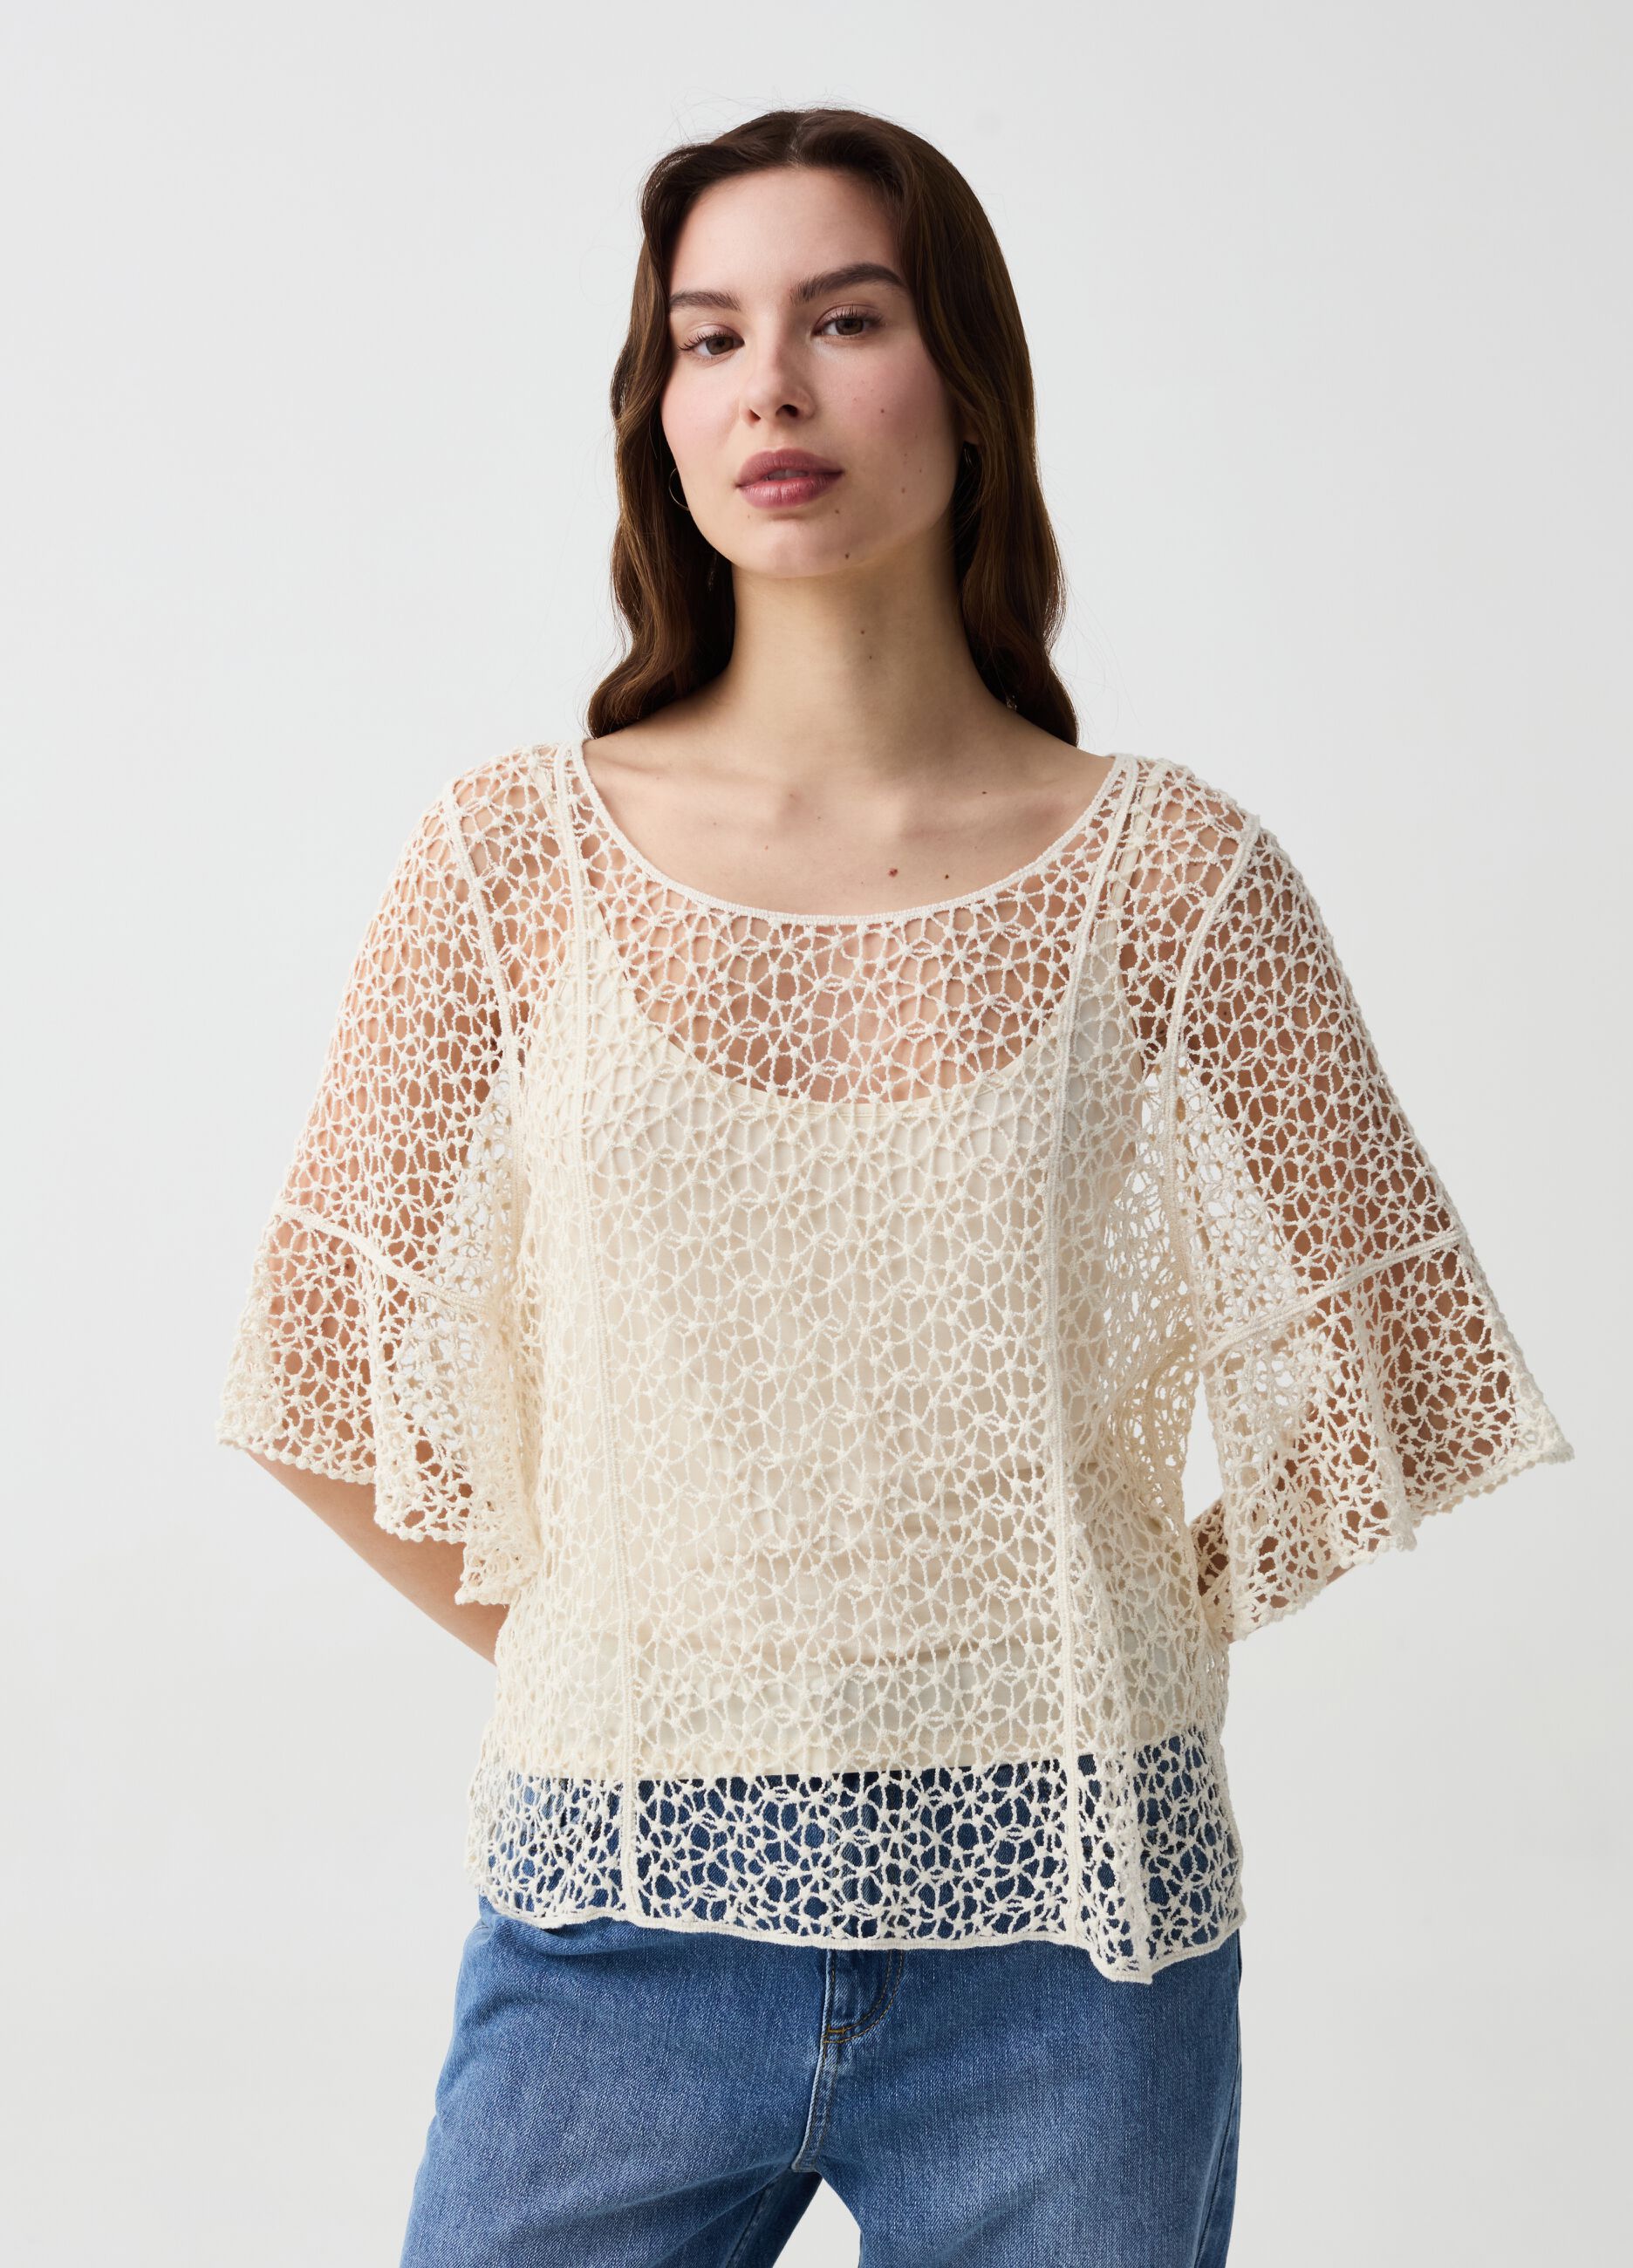 Crochet top with elbow-length sleeves